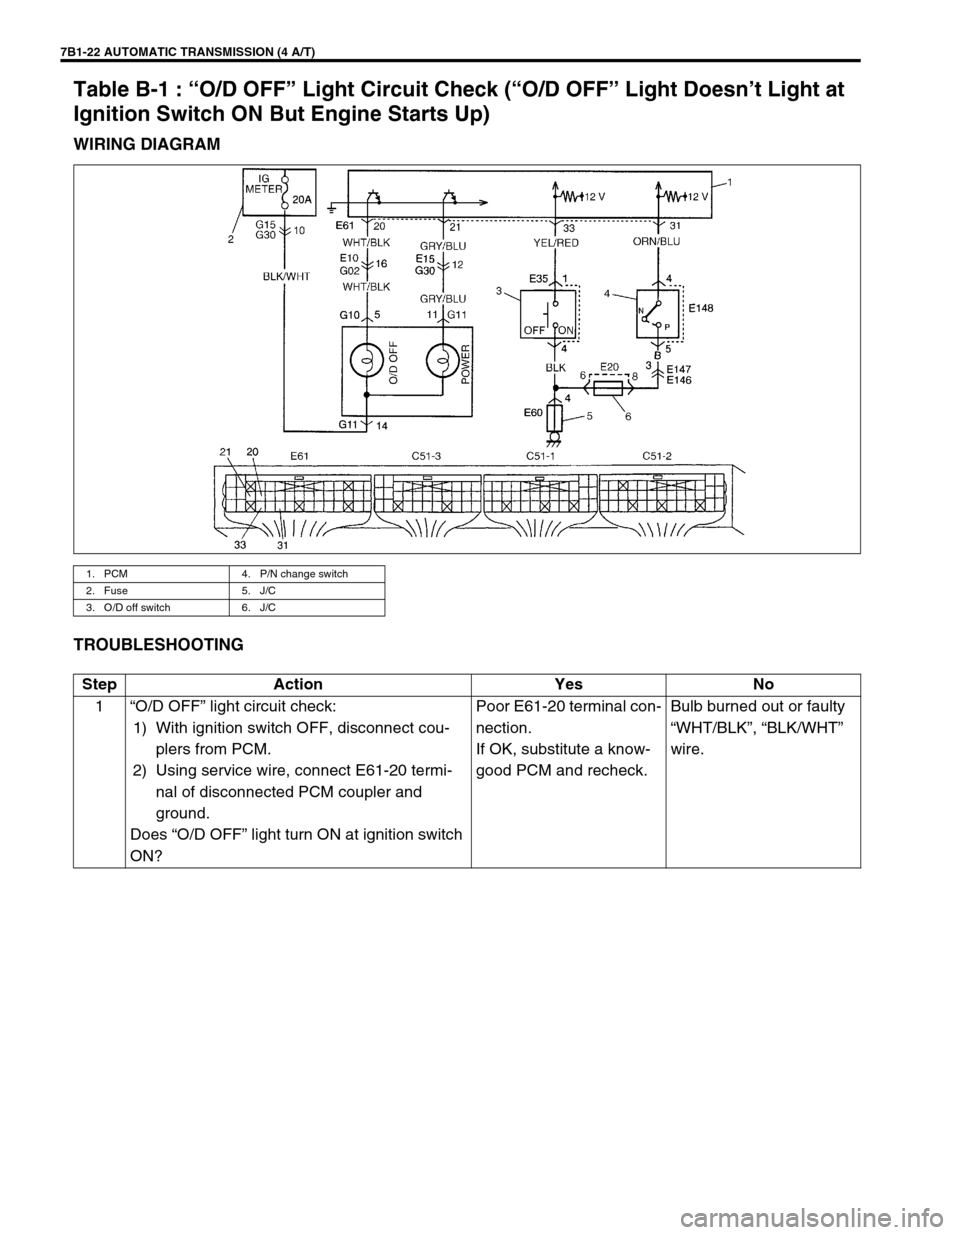 SUZUKI GRAND VITARA 1999 2.G Owners Guide 7B1-22 AUTOMATIC TRANSMISSION (4 A/T)
Table B-1 : “O/D OFF” Light Circuit Check (“O/D OFF” Light Doesn’t Light at 
Ignition Switch ON But Engine Starts Up)
WIRING DIAGRAM
TROUBLESHOOTING
1. 